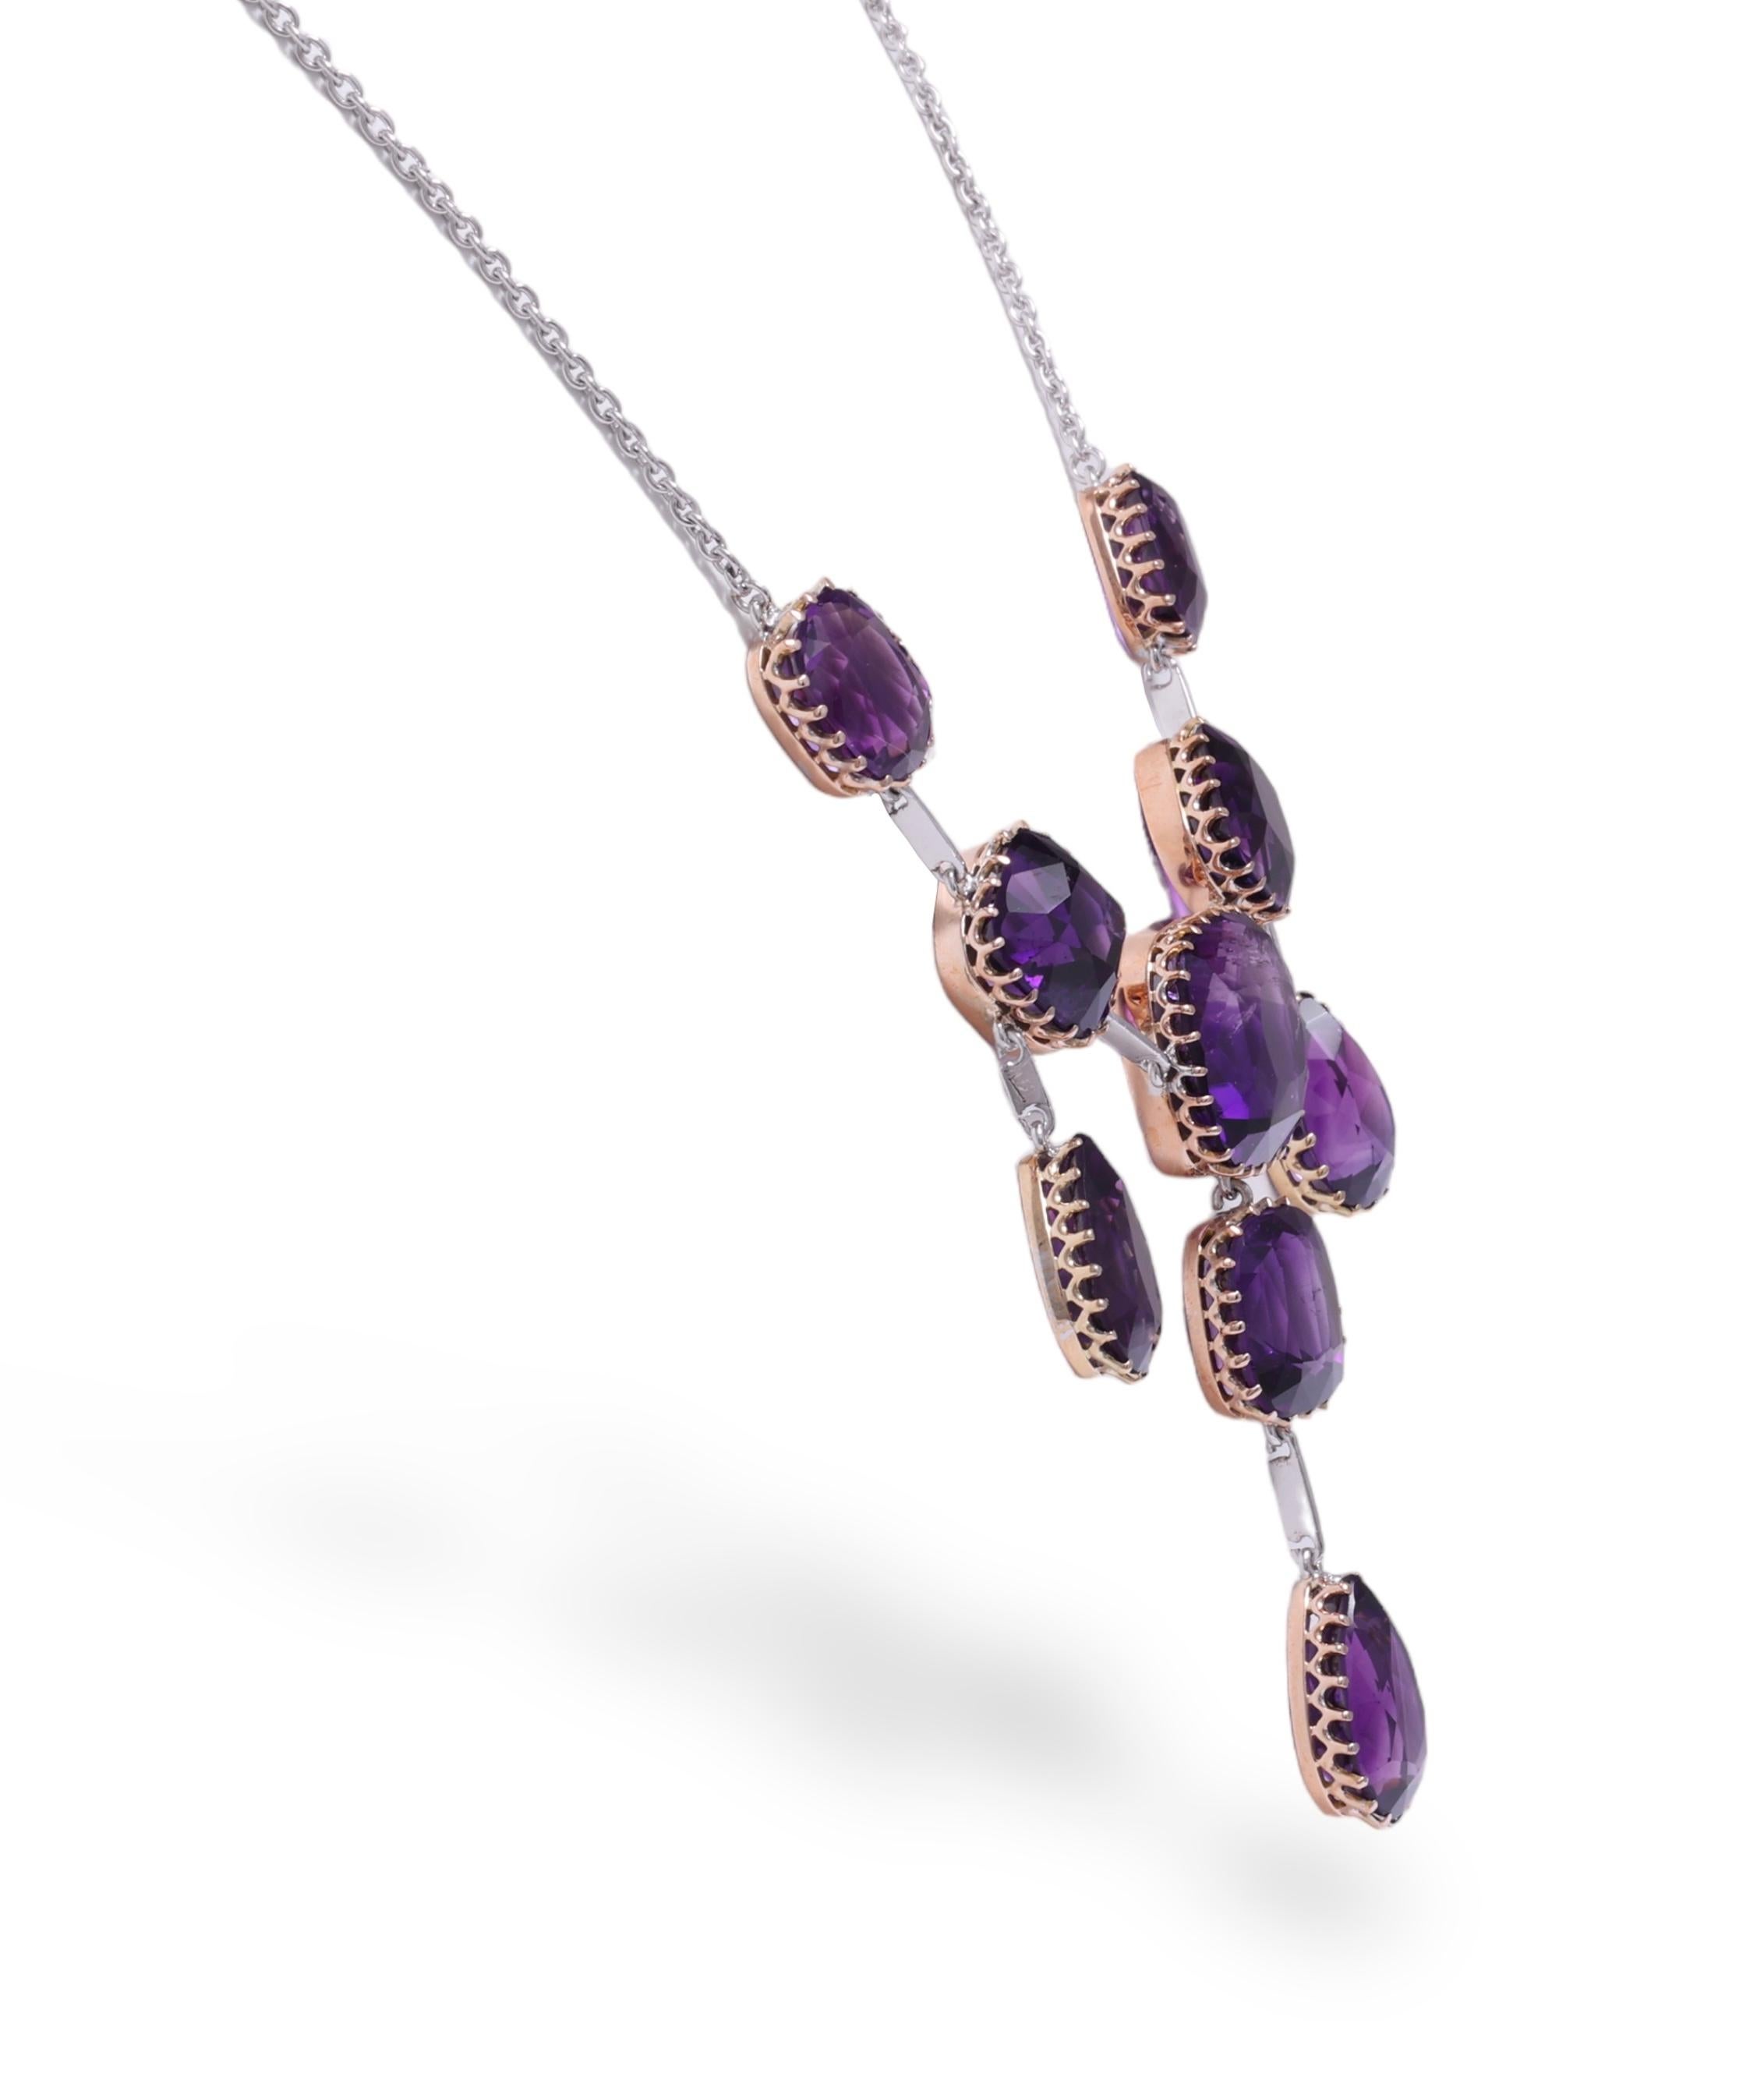 Gorgeous Platinum / Gold Chandelier Drop Necklace With 55 ct. Amethyst Gemstones In Excellent Condition For Sale In Antwerp, BE